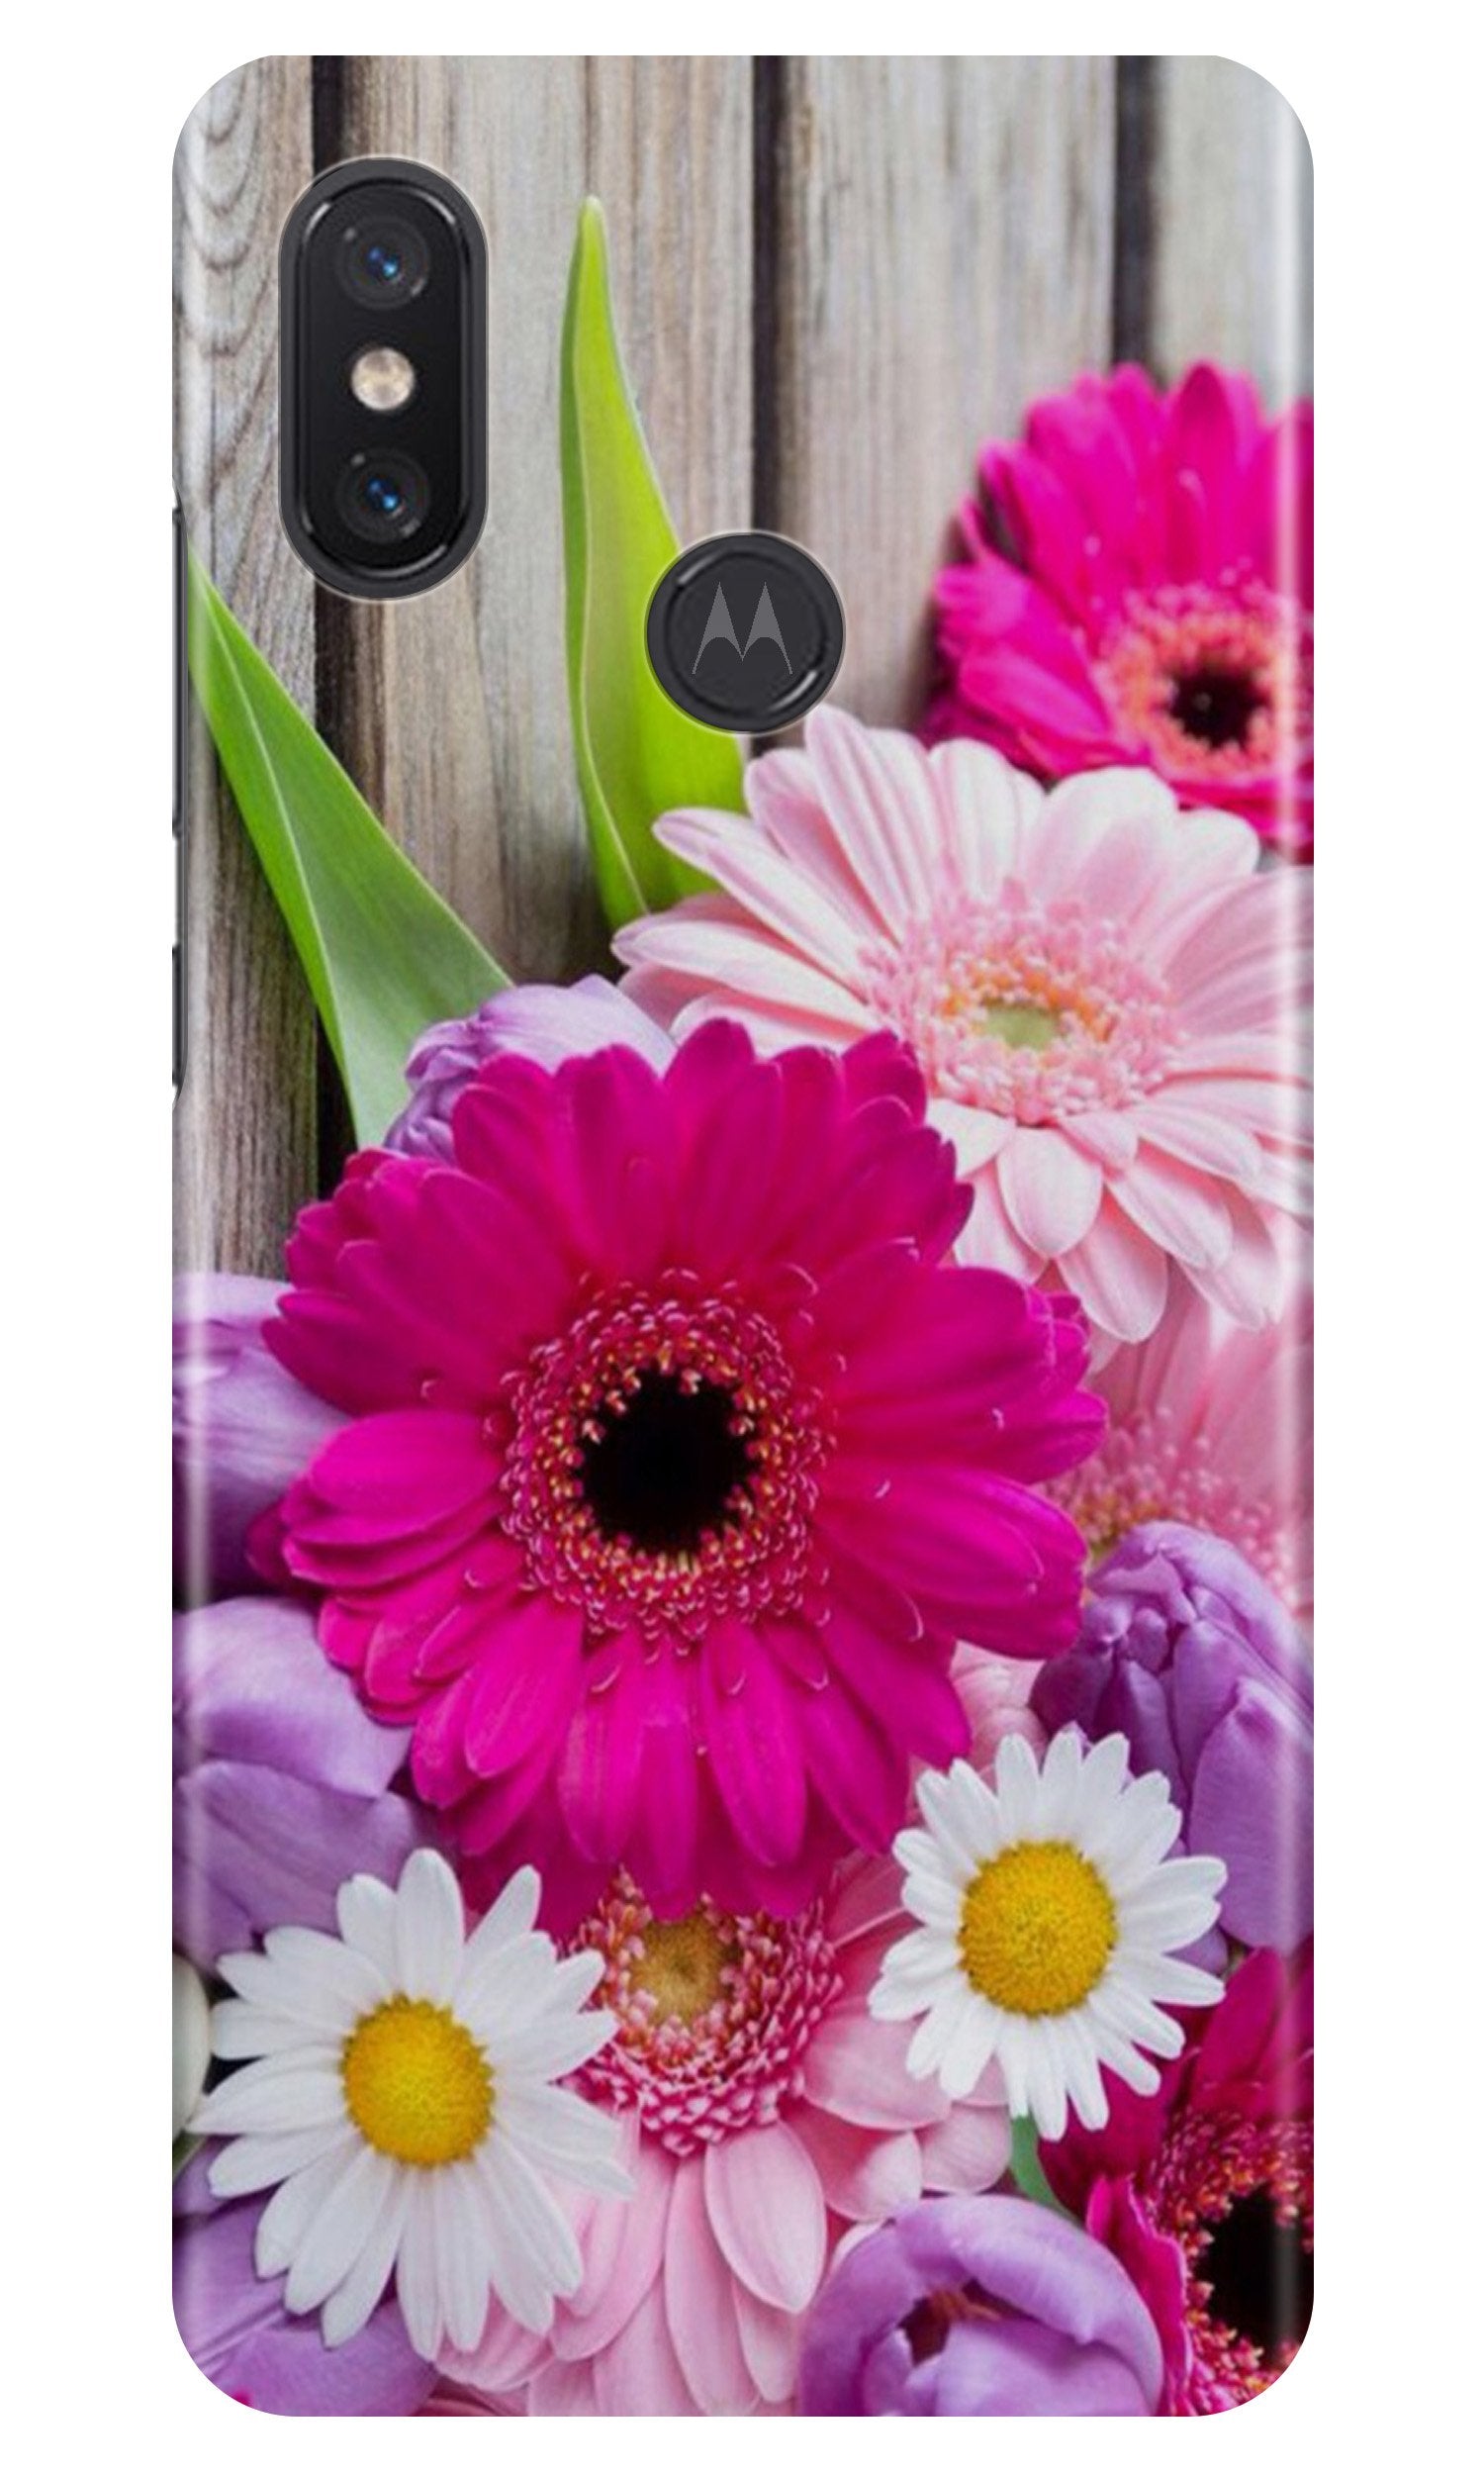 Coloful Daisy Case for Moto One Power